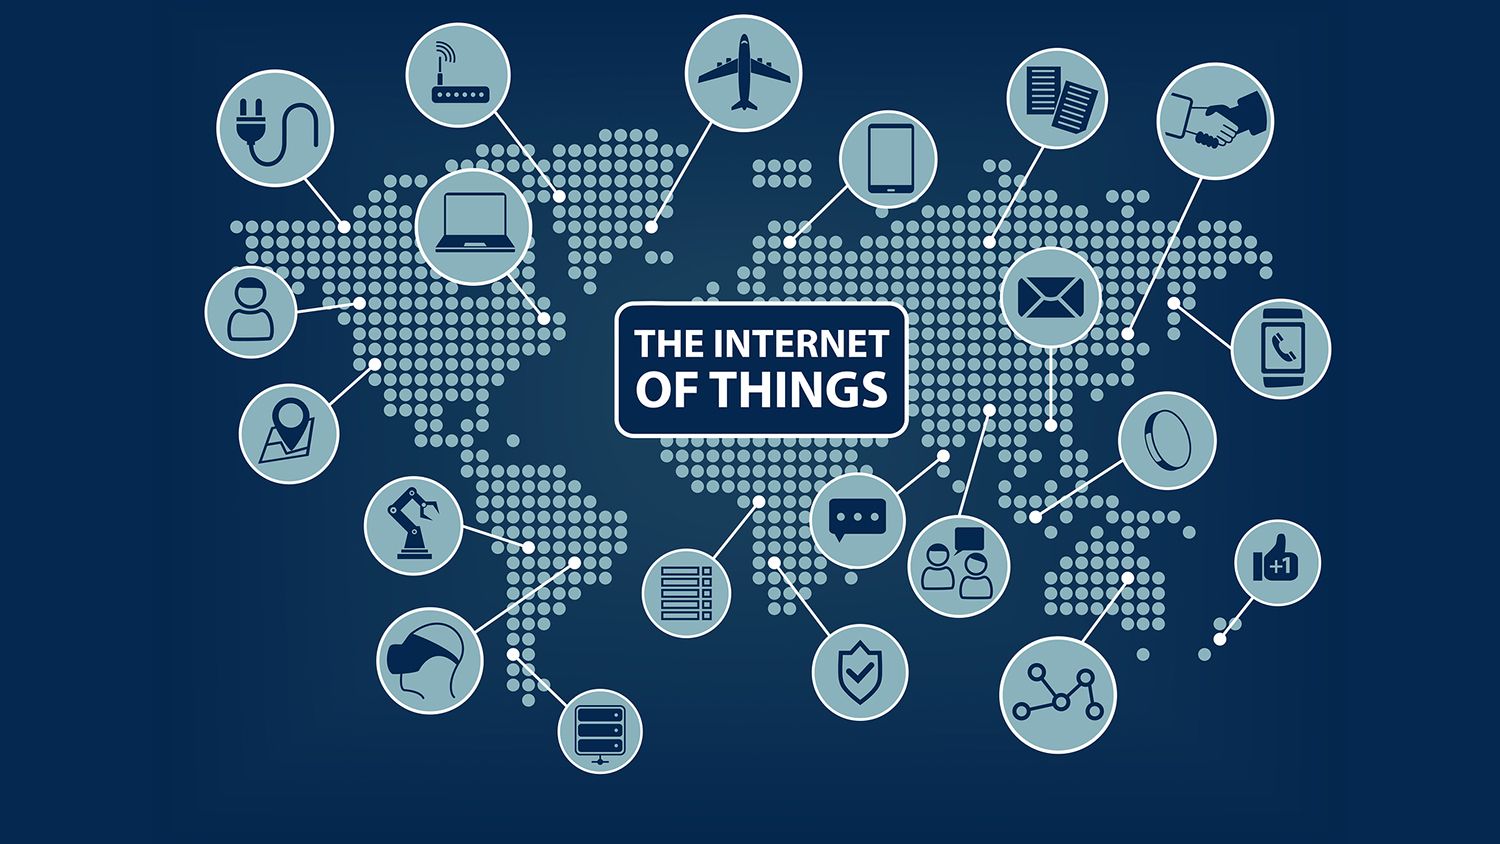 Internet of things, travel industry, IOT, virtual and physical innovations